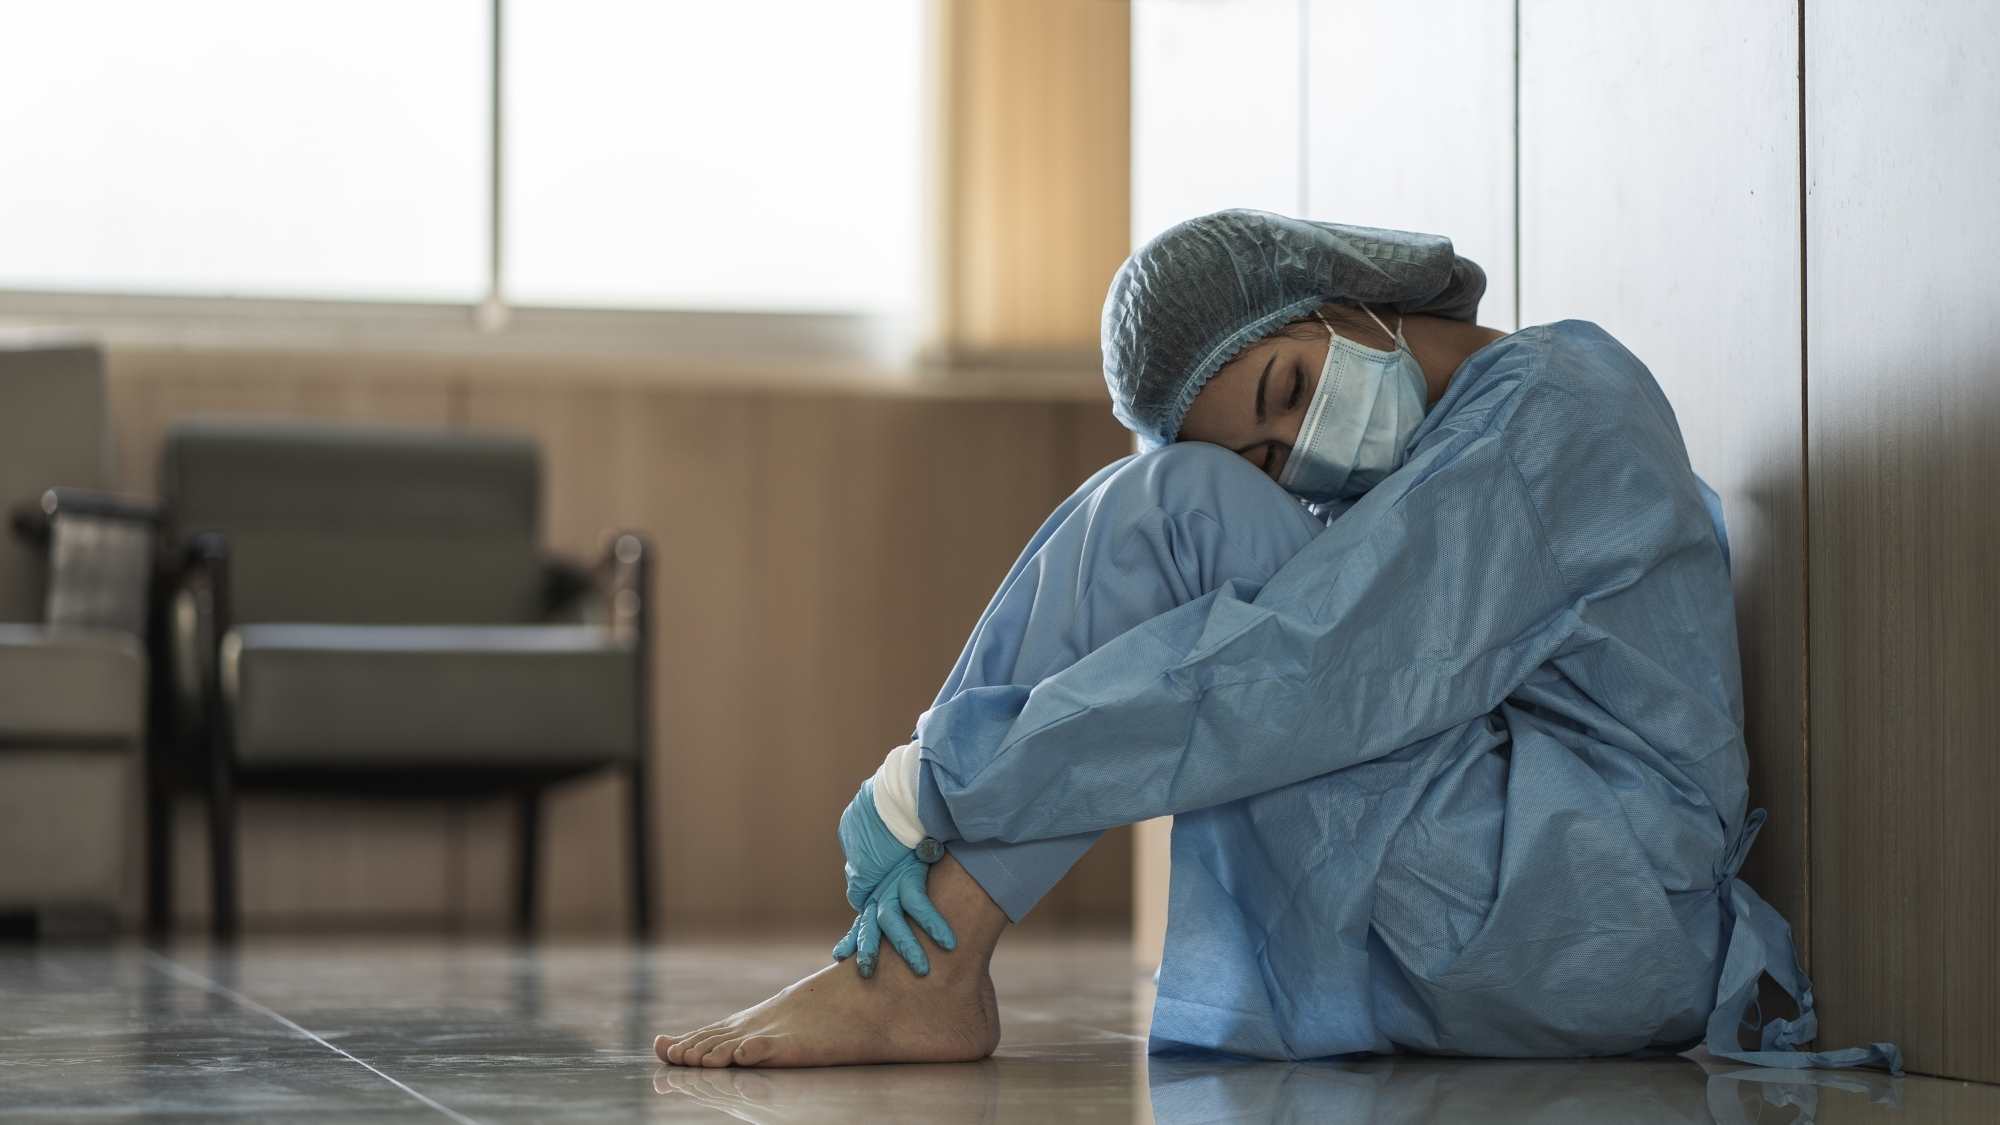 Female health professional in scrubs with mask, barefoot, sitting on floor resting head on knees